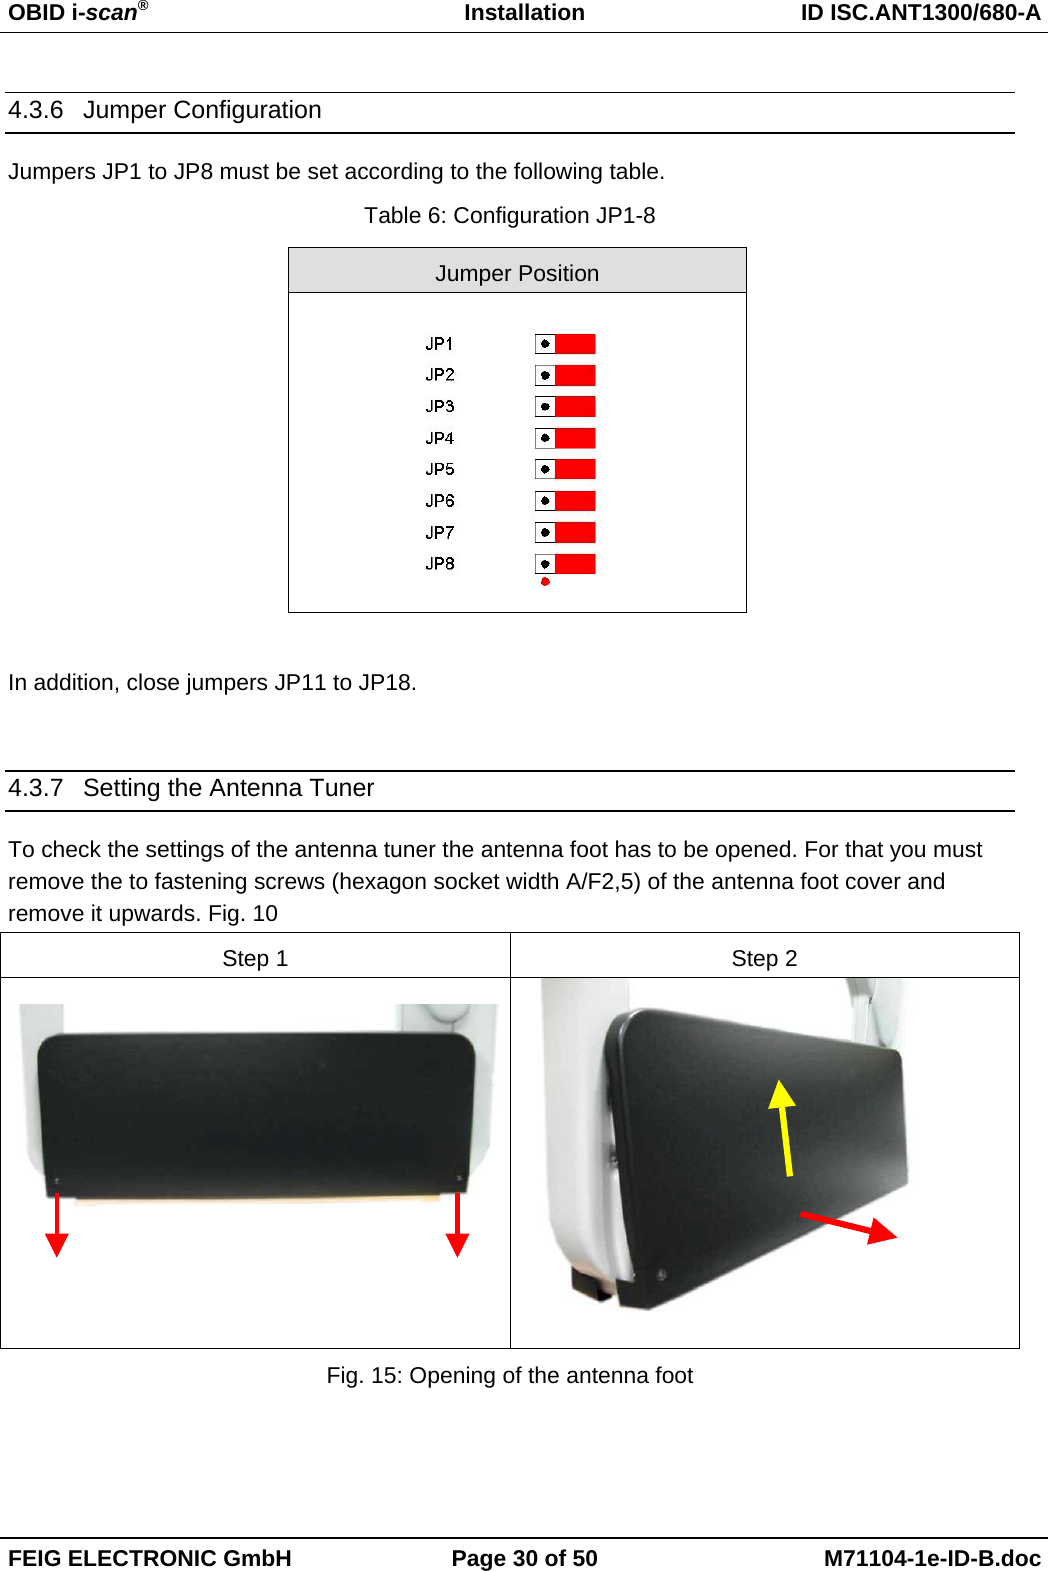 OBID i-scan®Installation ID ISC.ANT1300/680-AFEIG ELECTRONIC GmbH Page 30 of 50 M71104-1e-ID-B.doc4.3.6 Jumper ConfigurationJumpers JP1 to JP8 must be set according to the following table.Table 6: Configuration JP1-8Jumper PositionIn addition, close jumpers JP11 to JP18.4.3.7  Setting the Antenna TunerTo check the settings of the antenna tuner the antenna foot has to be opened. For that you mustremove the to fastening screws (hexagon socket width A/F2,5) of the antenna foot cover andremove it upwards. Fig. 10Step 1 Step 2Fig. 15: Opening of the antenna foot